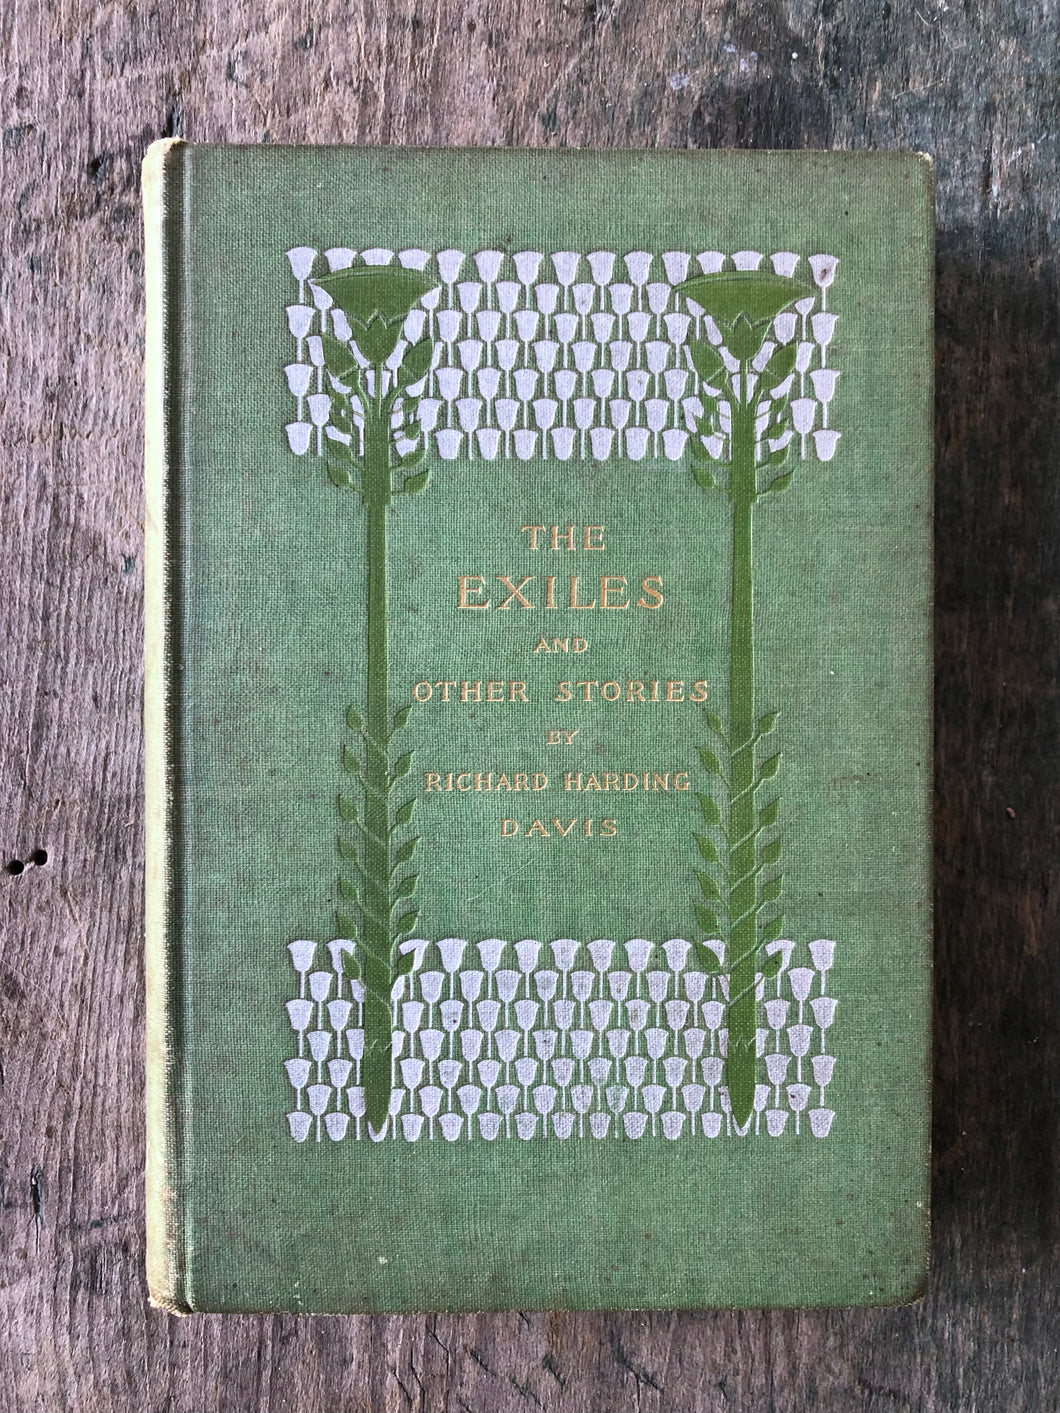 The Exiles and Other Stories by Richard Harding Davis